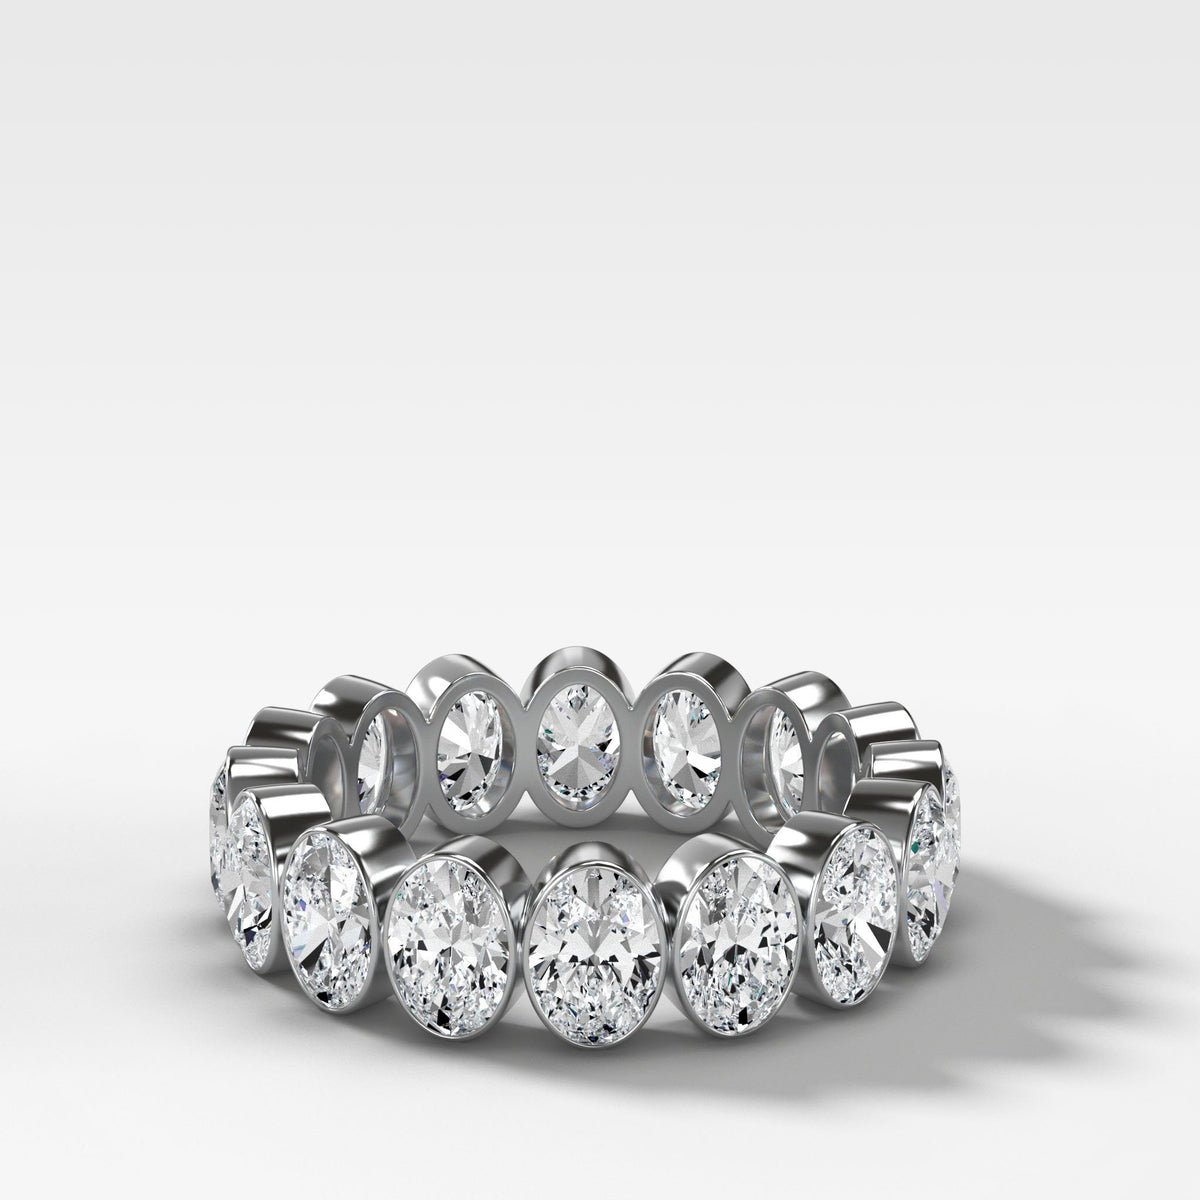 Bezel Set Eternity Band With Oval Cuts by Good Stone in White Gold